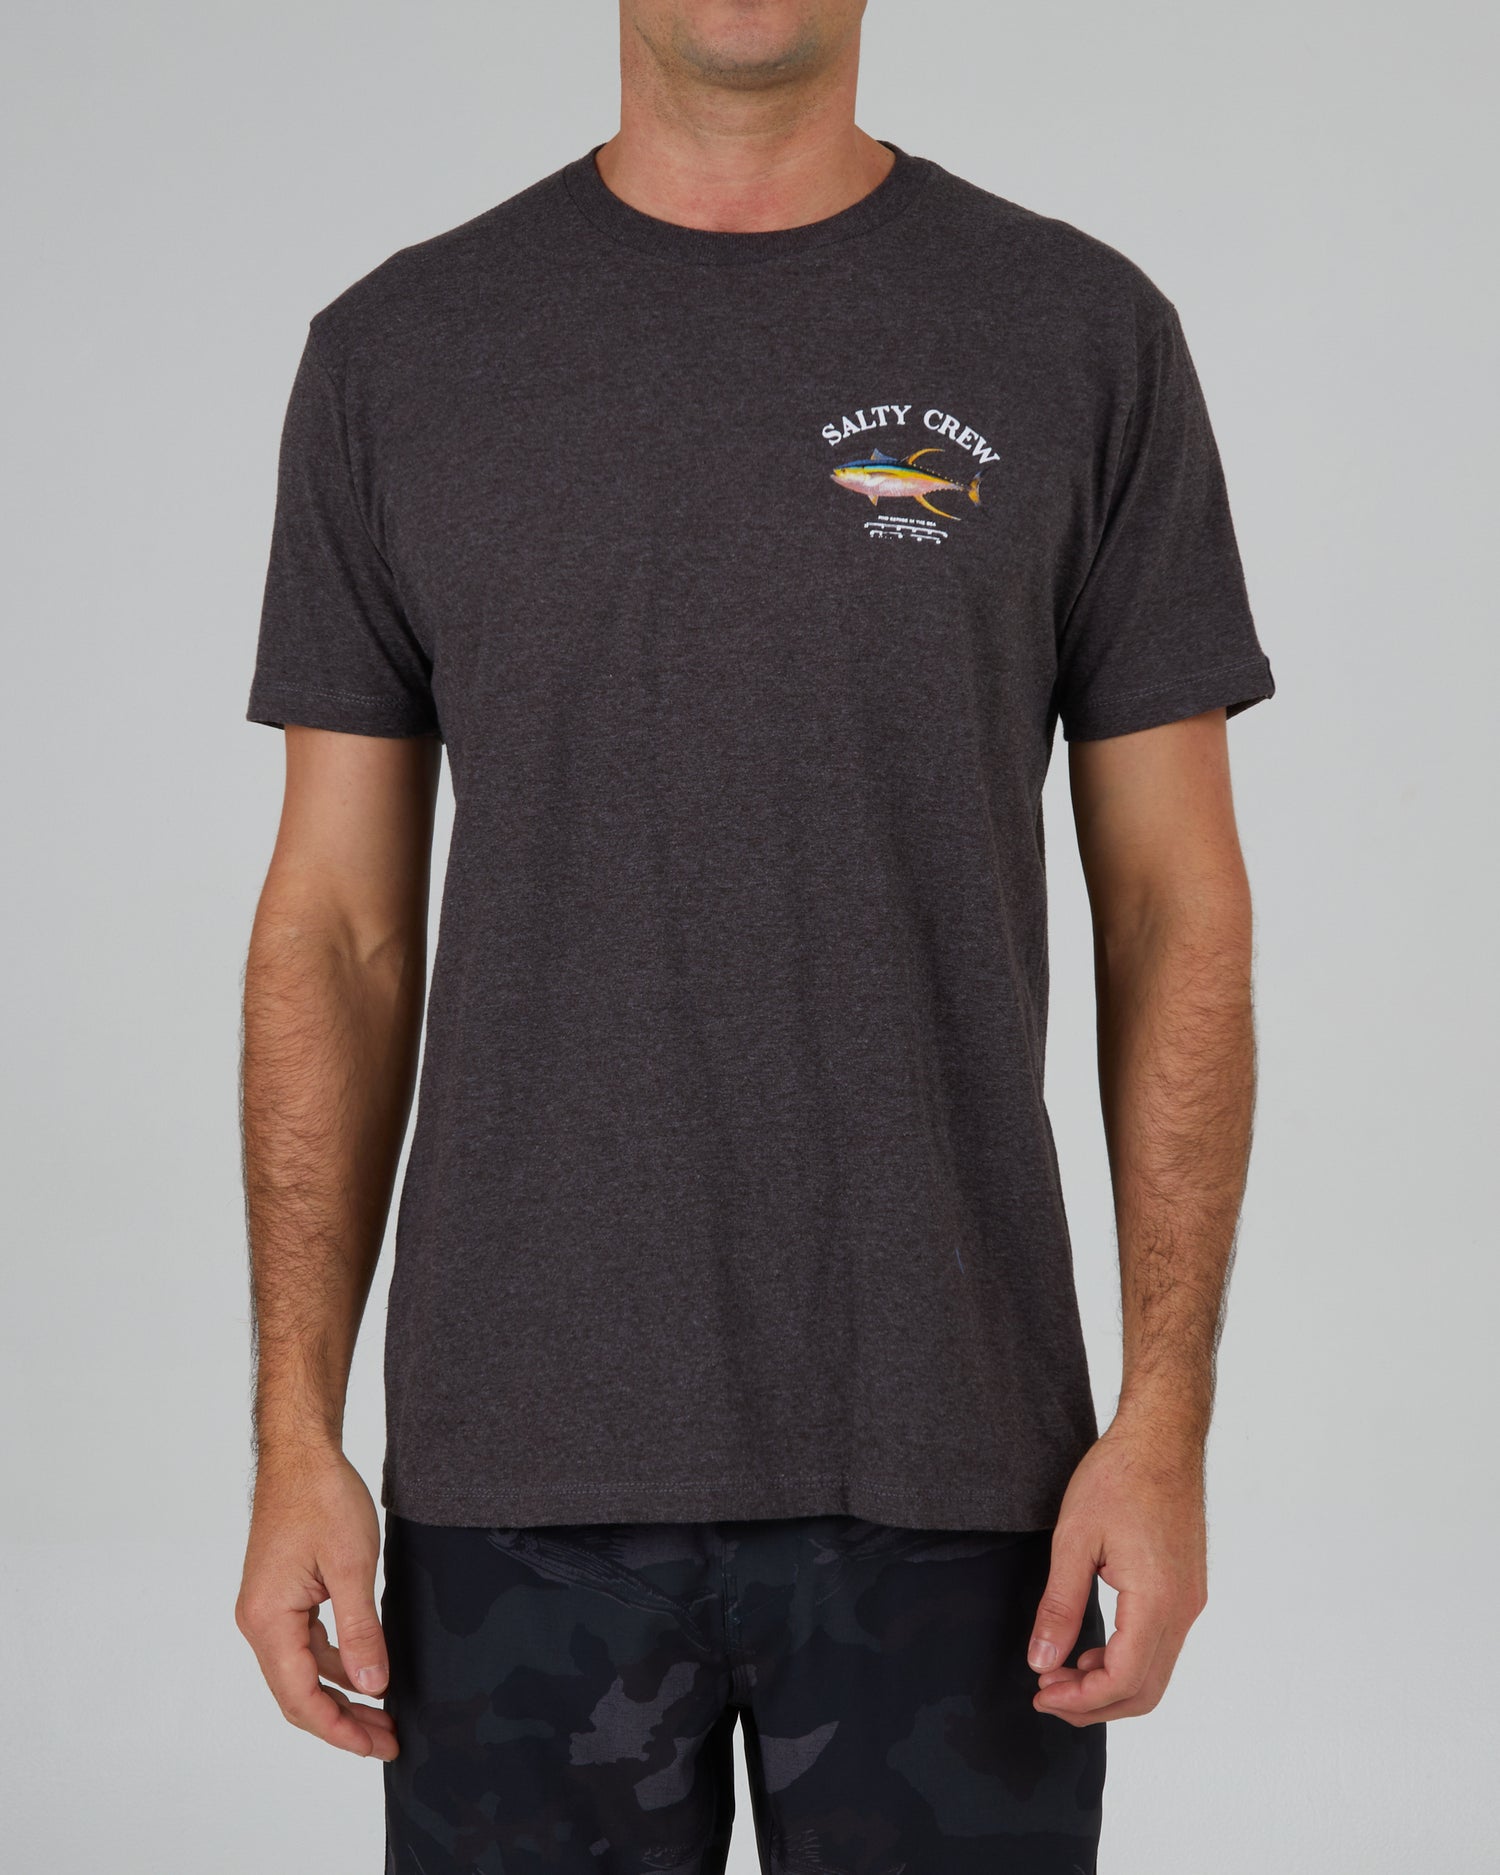 front view of Ahi Mount Charcoal Heather S/S Standard Tee